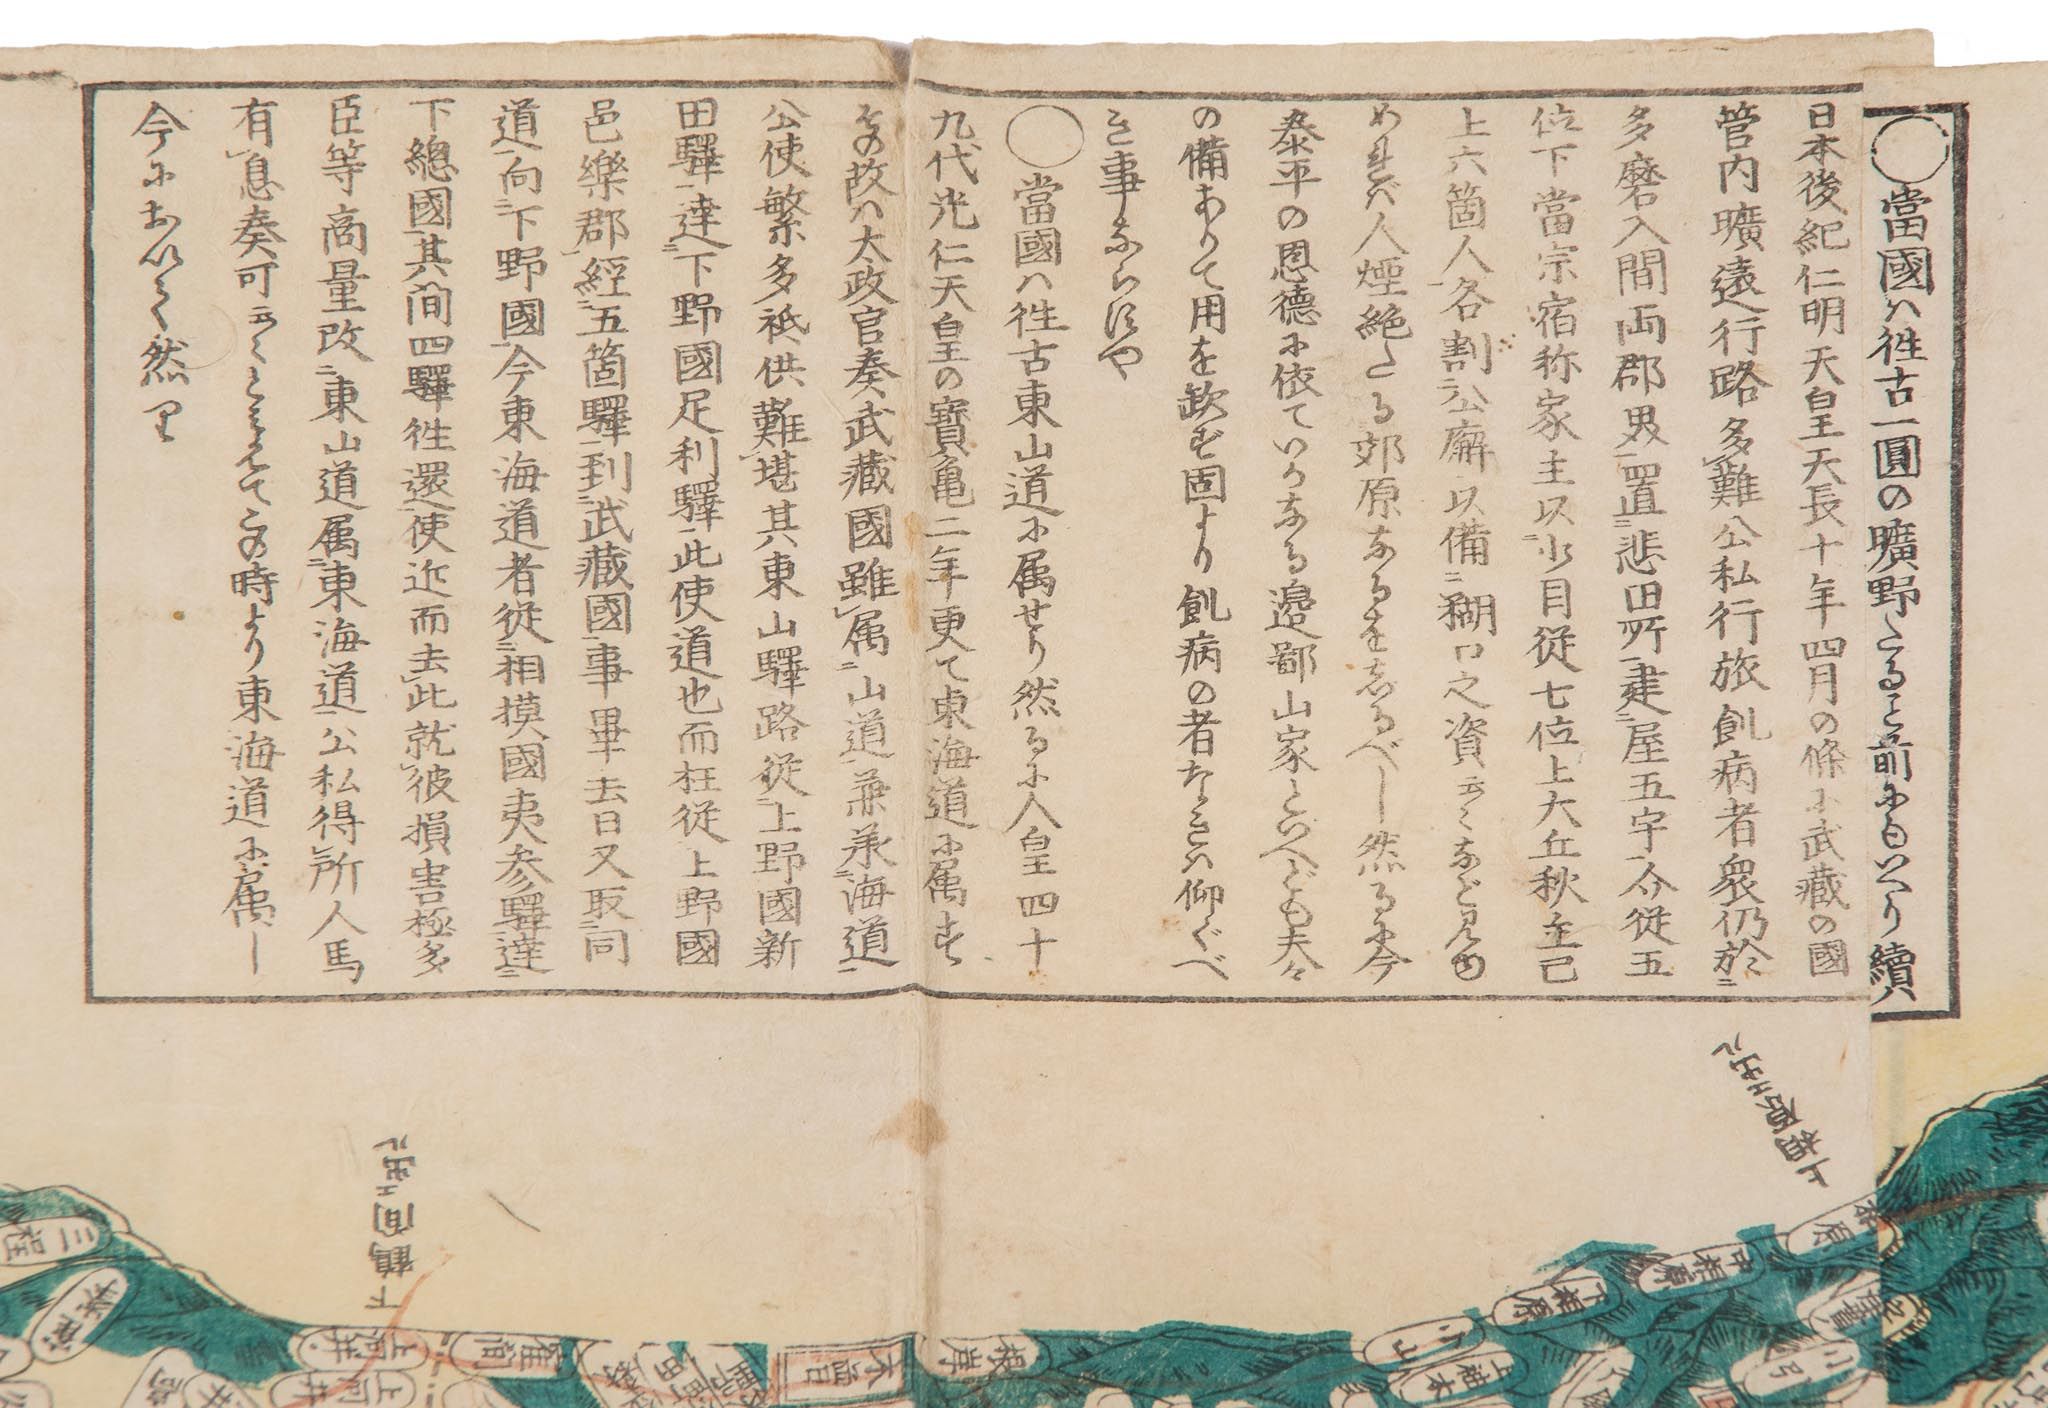 Ino (Tadataka) - A large map of Musashi province, showing Edo, or Tokyo, with extensive text - Image 3 of 6